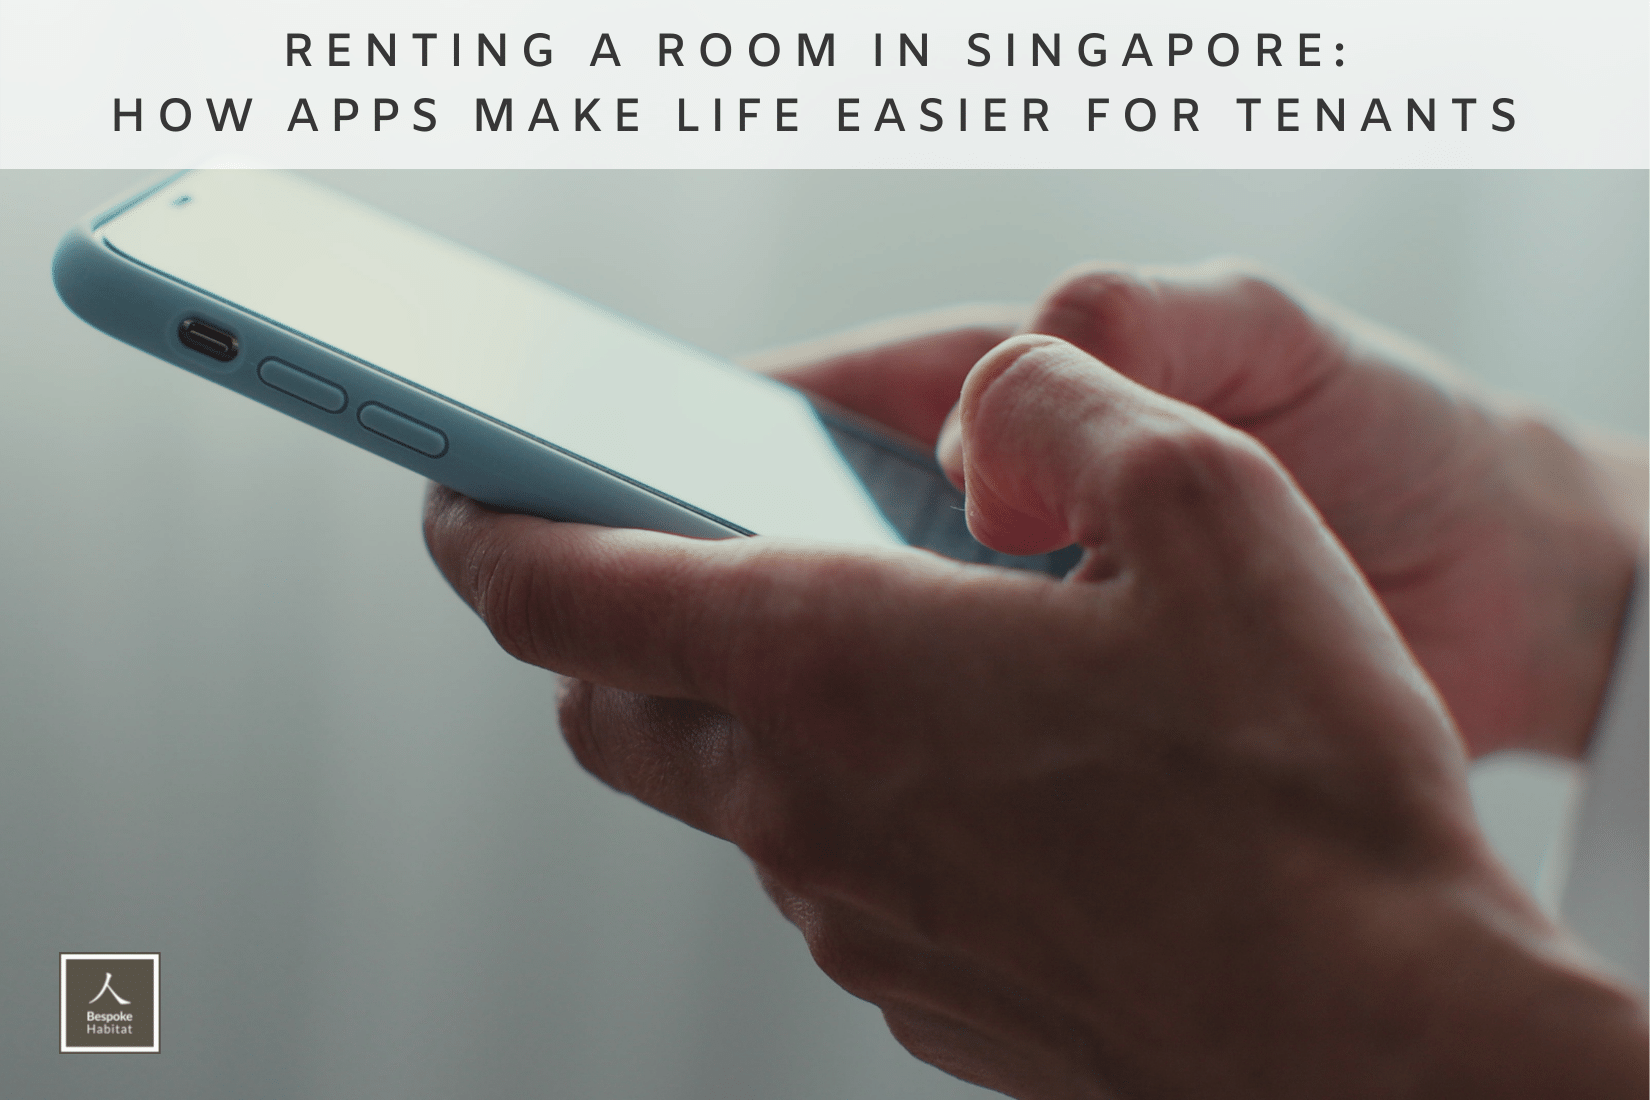 Renting a Room in Singapore how apps make life easier for tenants